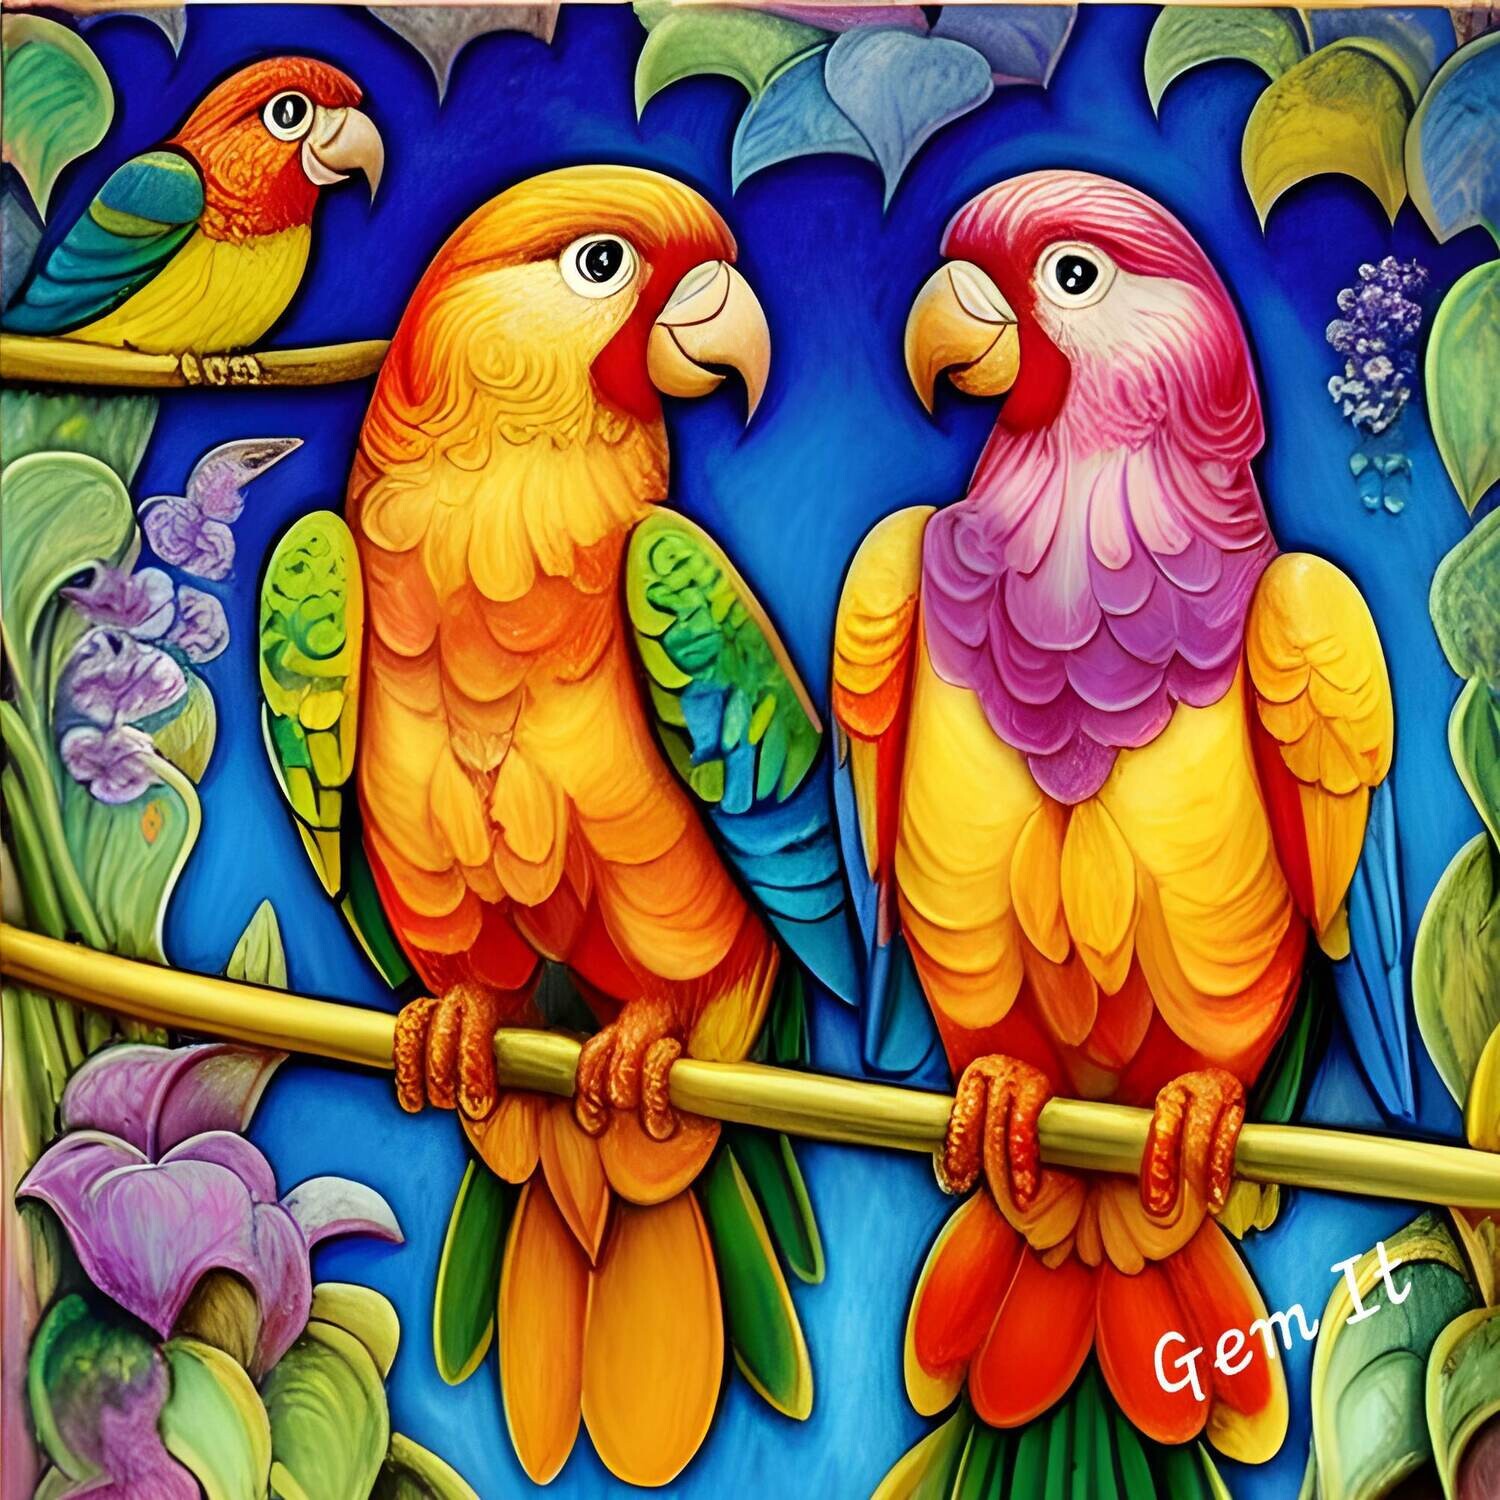 Love Birds 182 - Full Drill Diamond Painting - Specially ordered for you. Delivery is approximately 4 - 6 weeks.